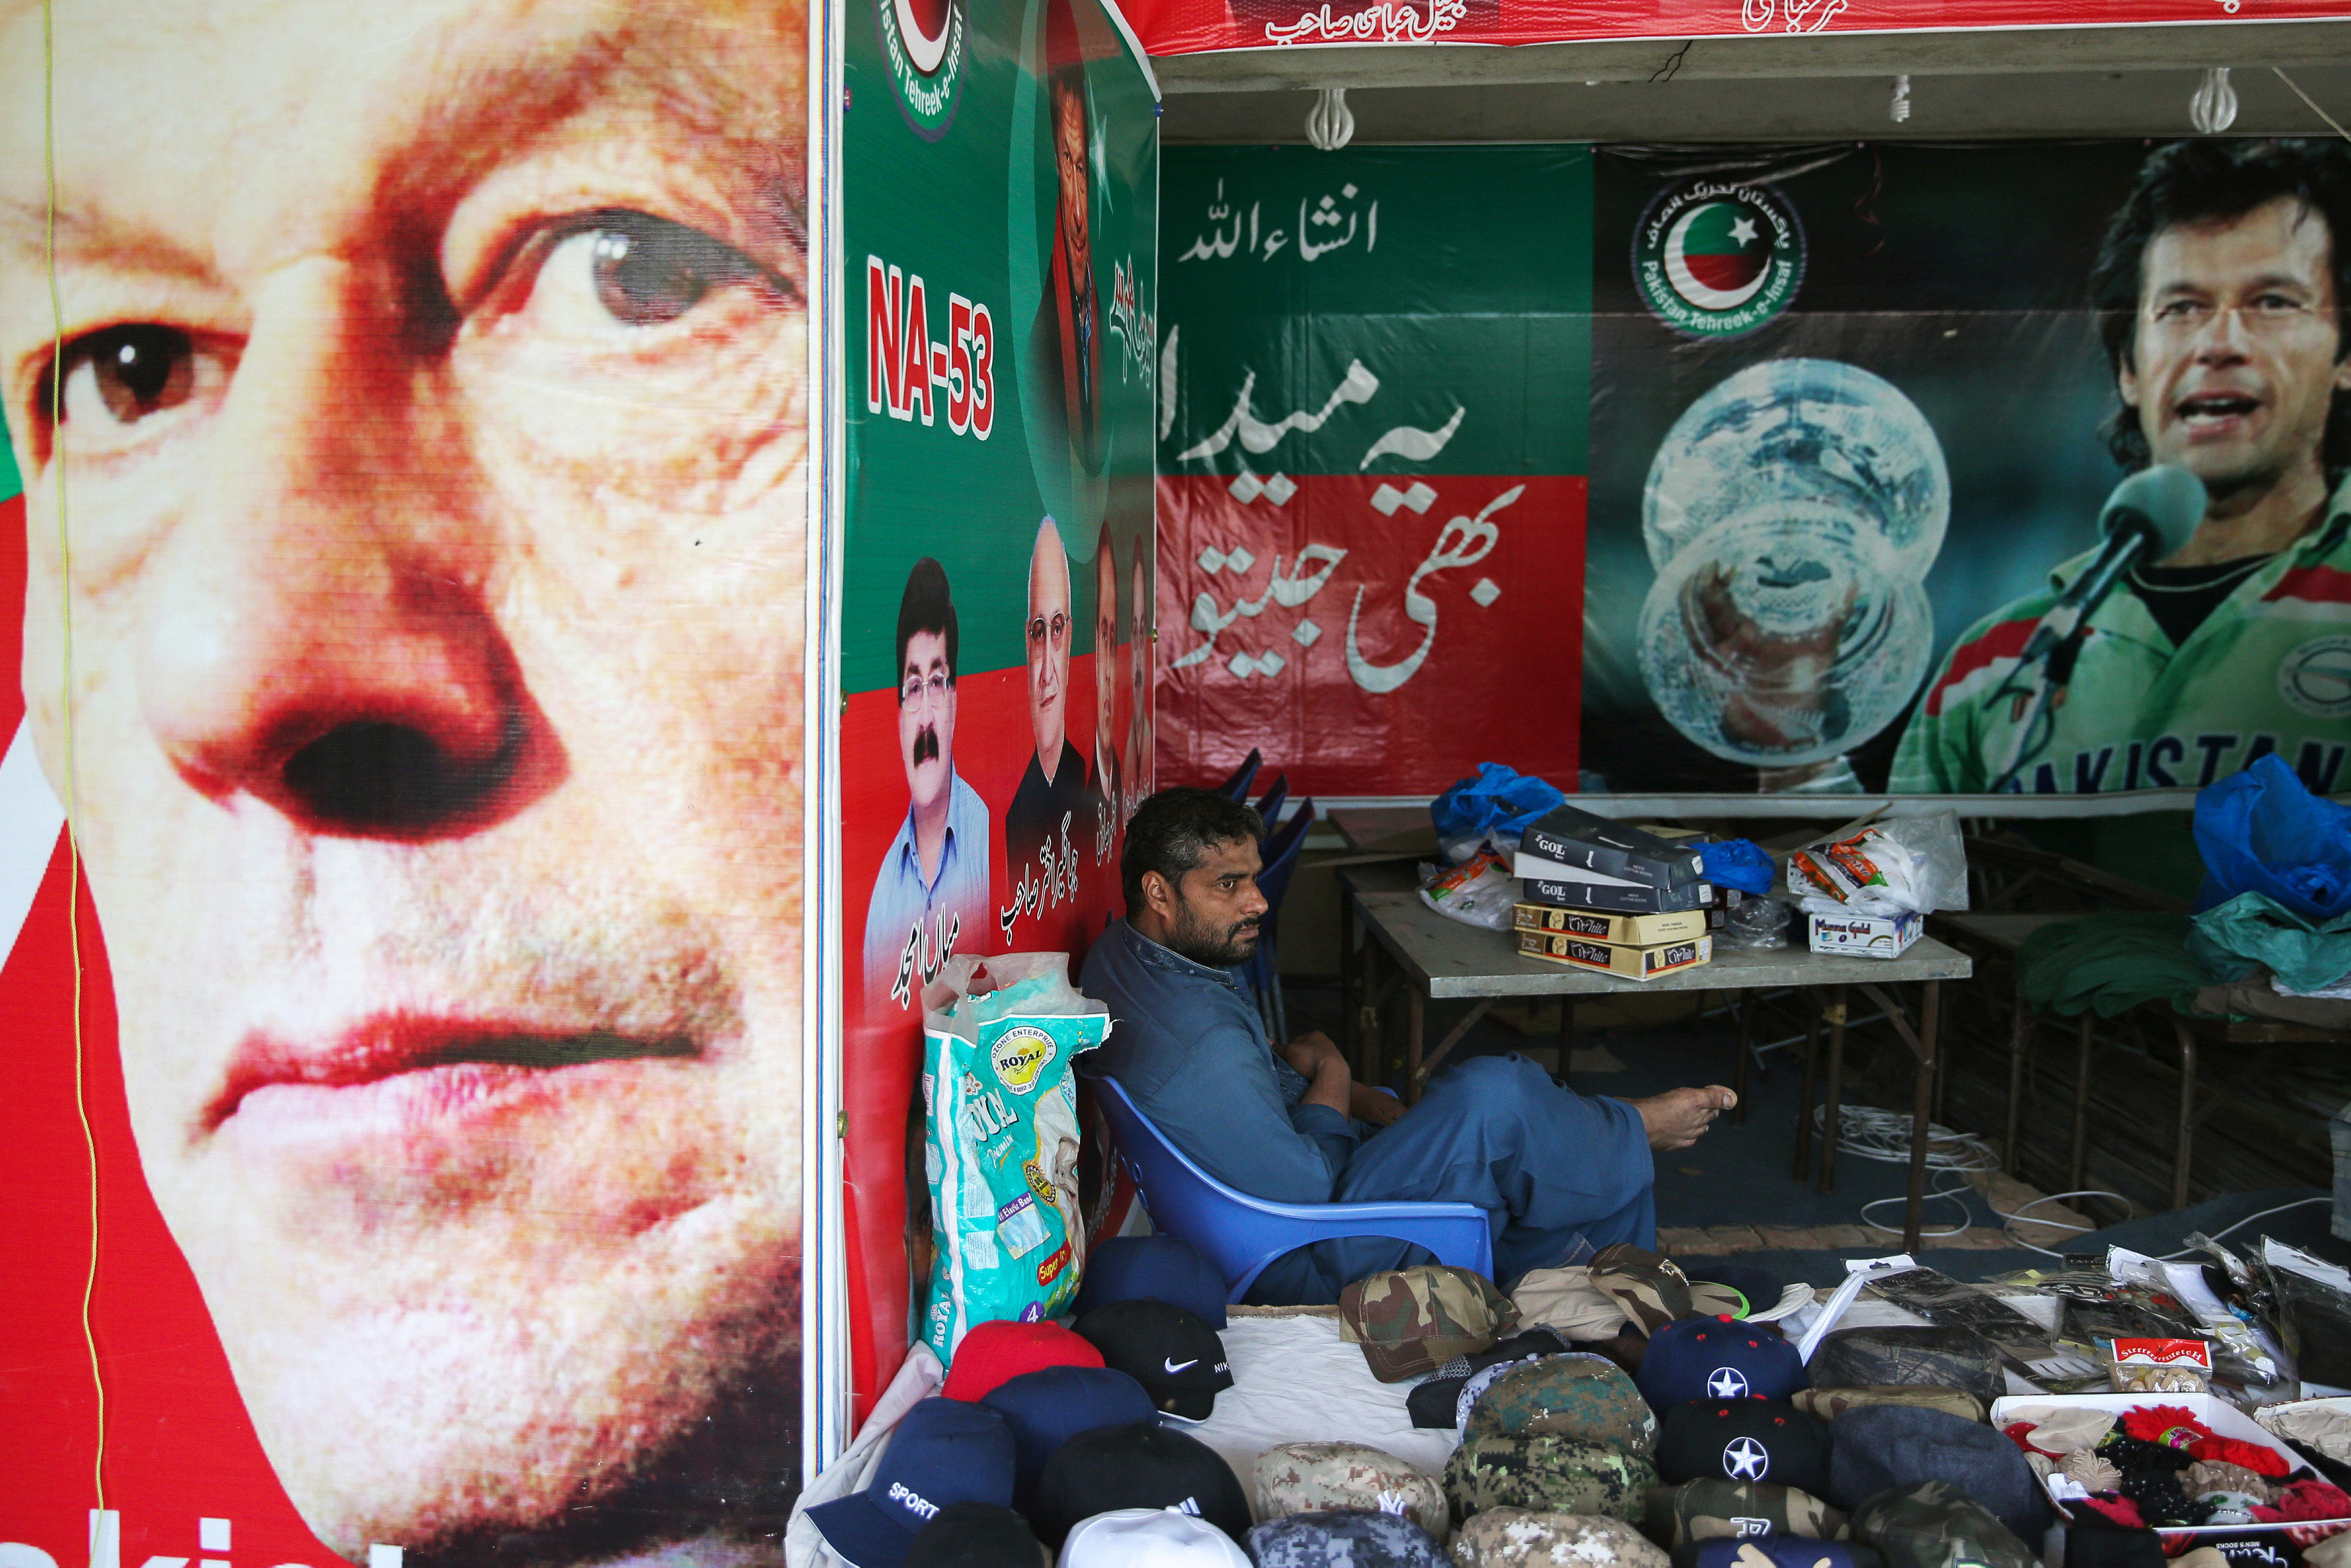 A vendor sits next to images of cricket star-turned-politician Imran Khan, chairman of Pakistan Tehreek-e-Insaf (PTI) at a market in Islamabad, Pakistan. REUTERS/Athit Perawongmetha